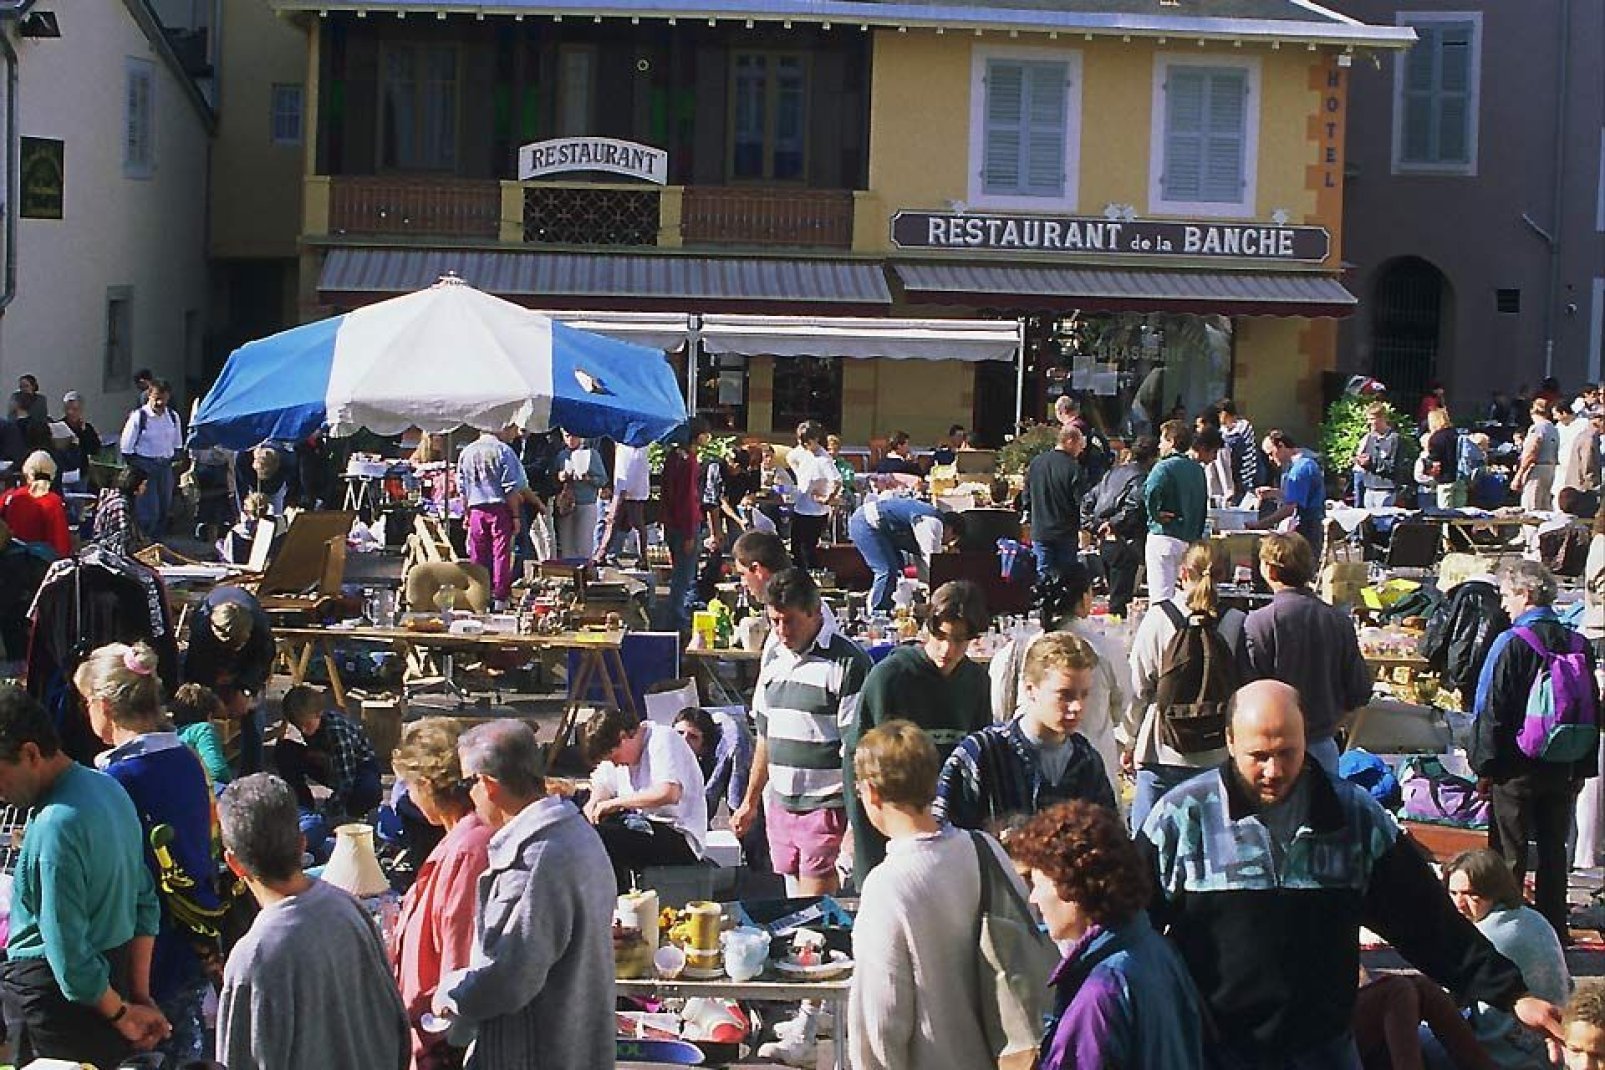 Many events, like garage sales, take place in Chambéry, especially during the summer season.